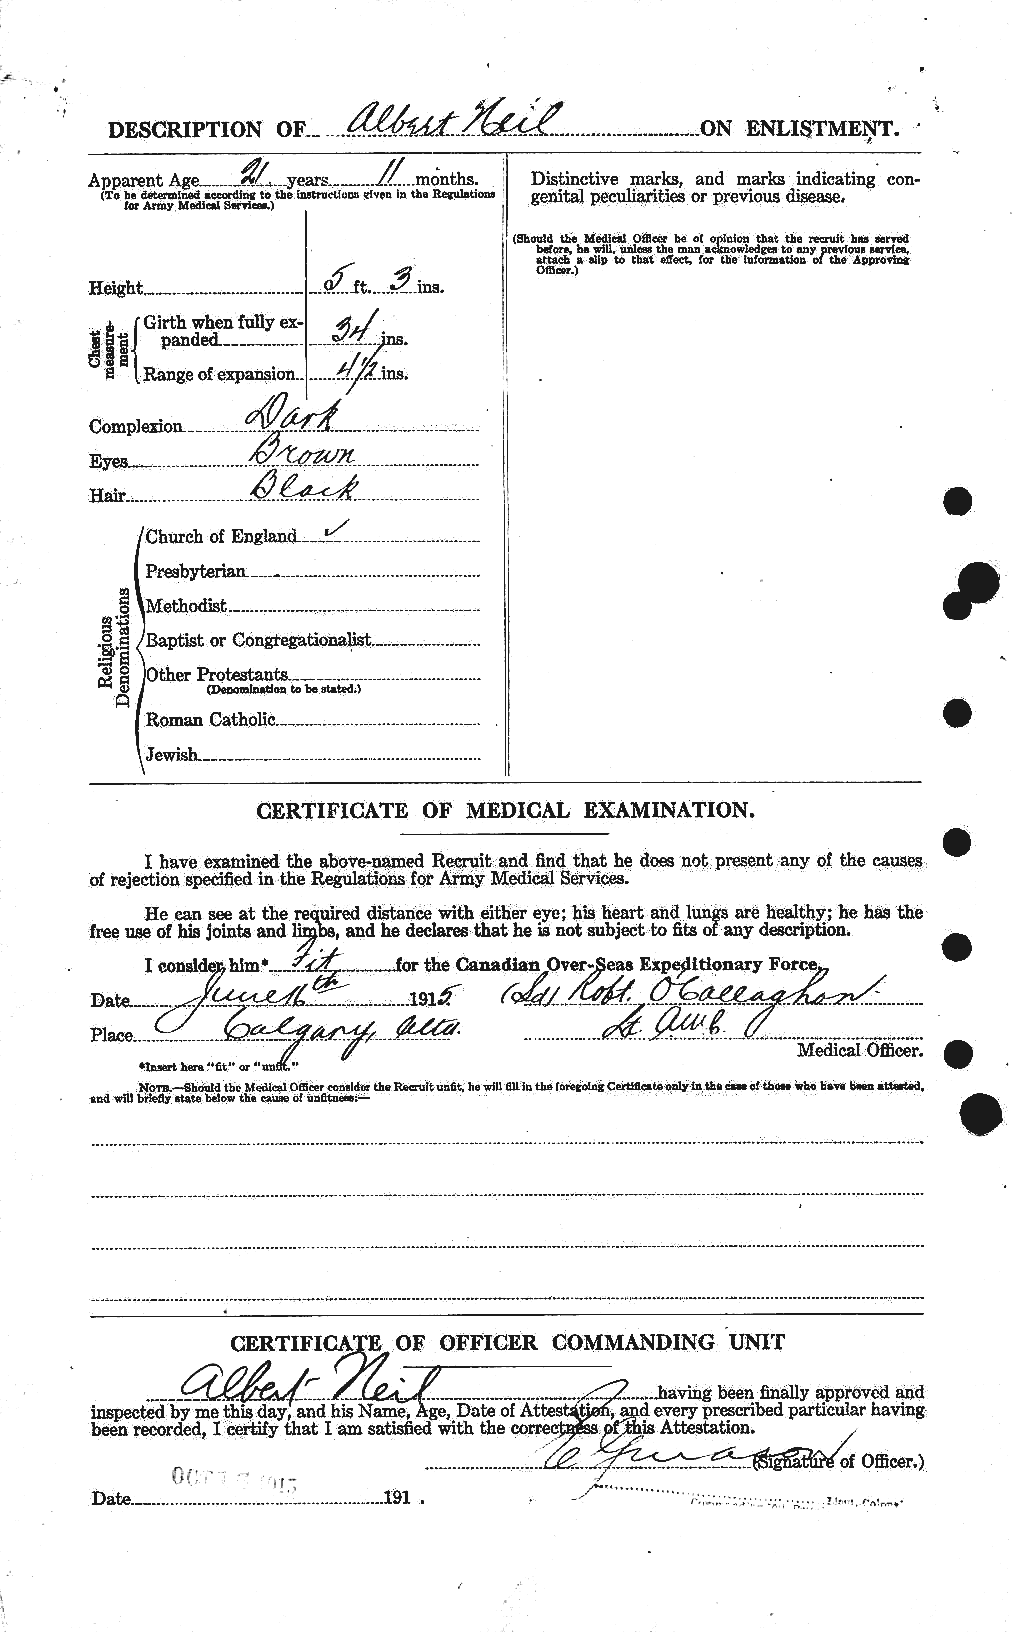 Personnel Records of the First World War - CEF 545542b